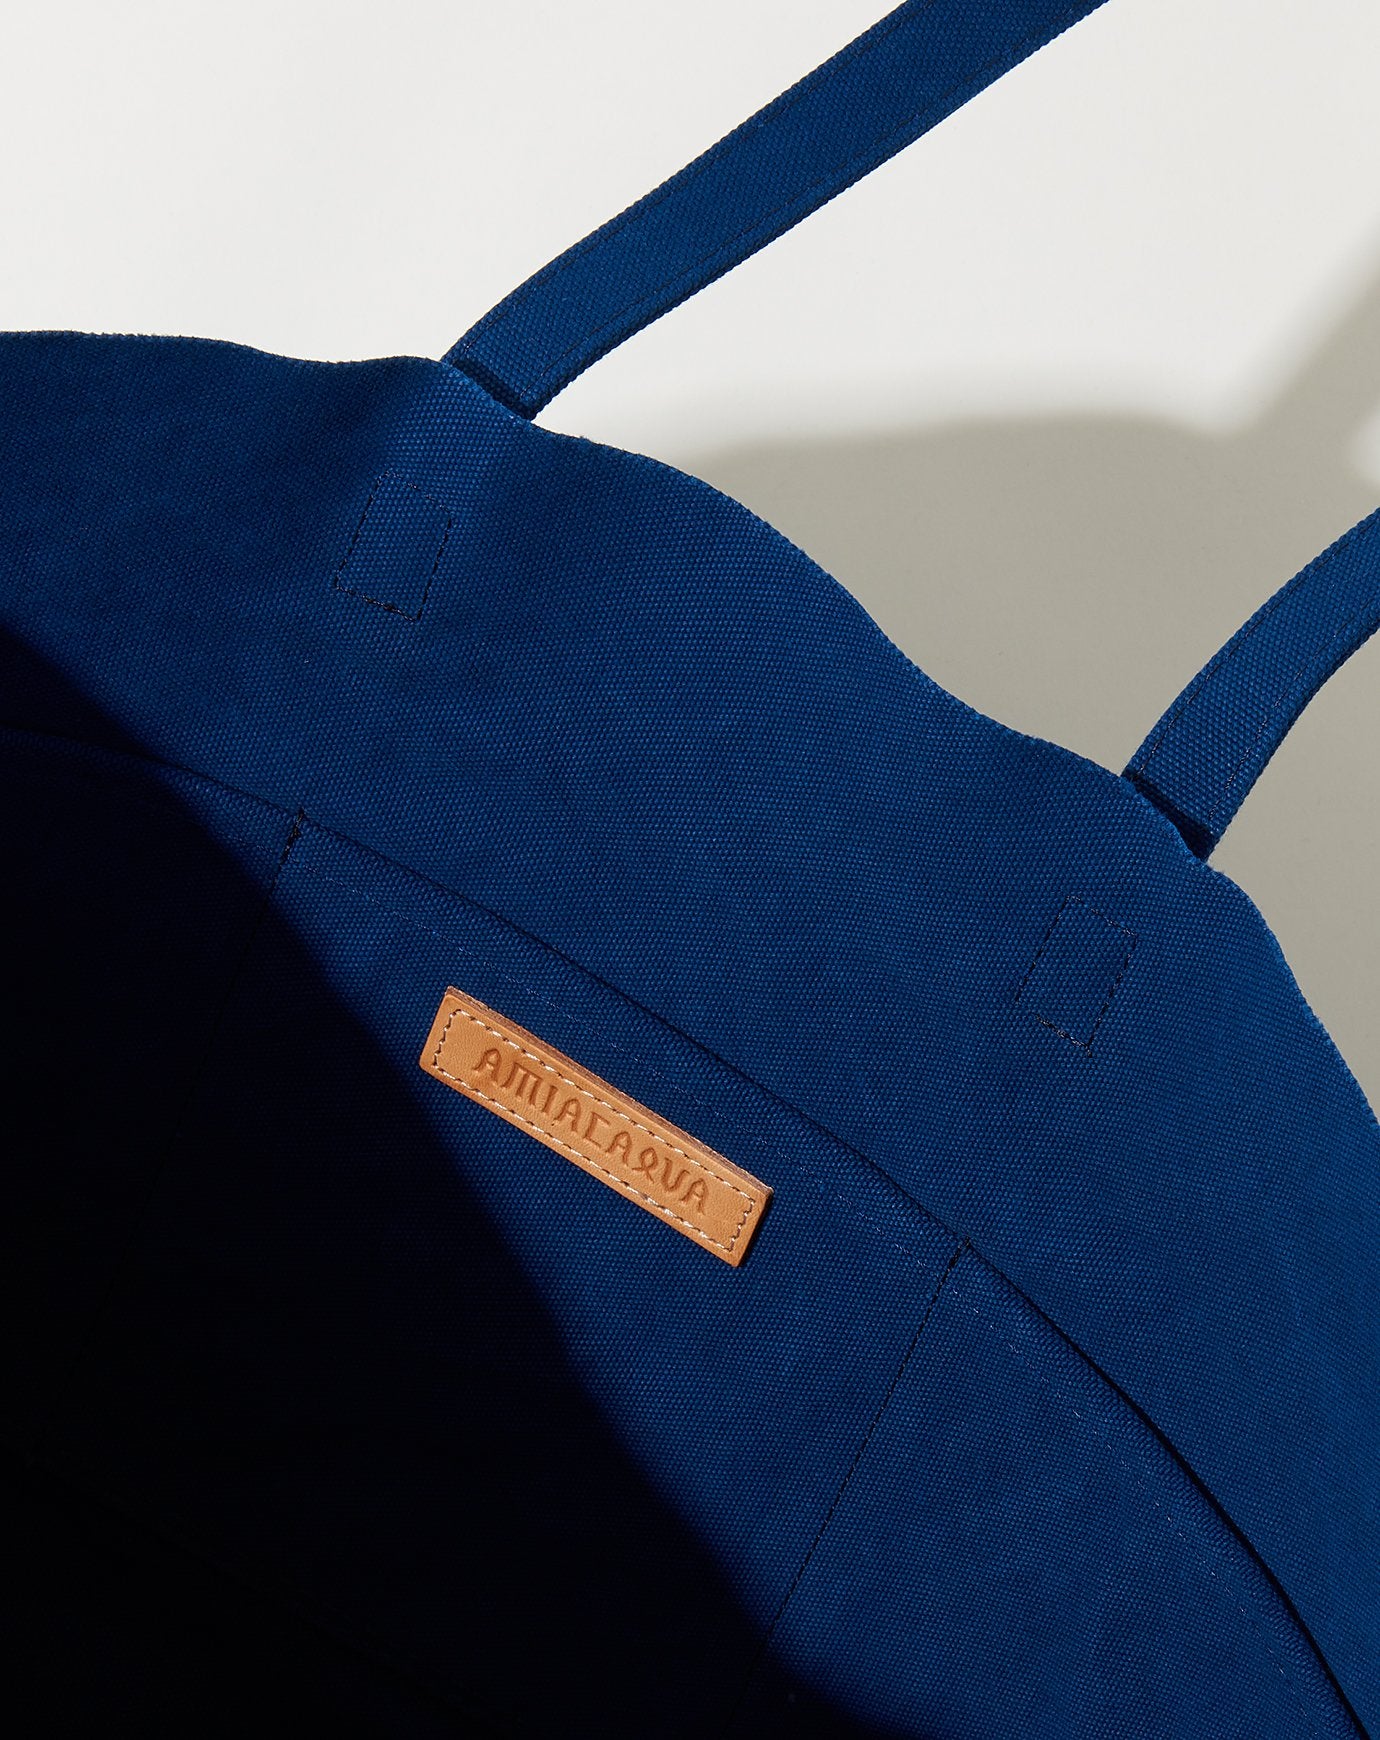 Amiacalva Washed Canvas 6 Pocket Tote in Blue